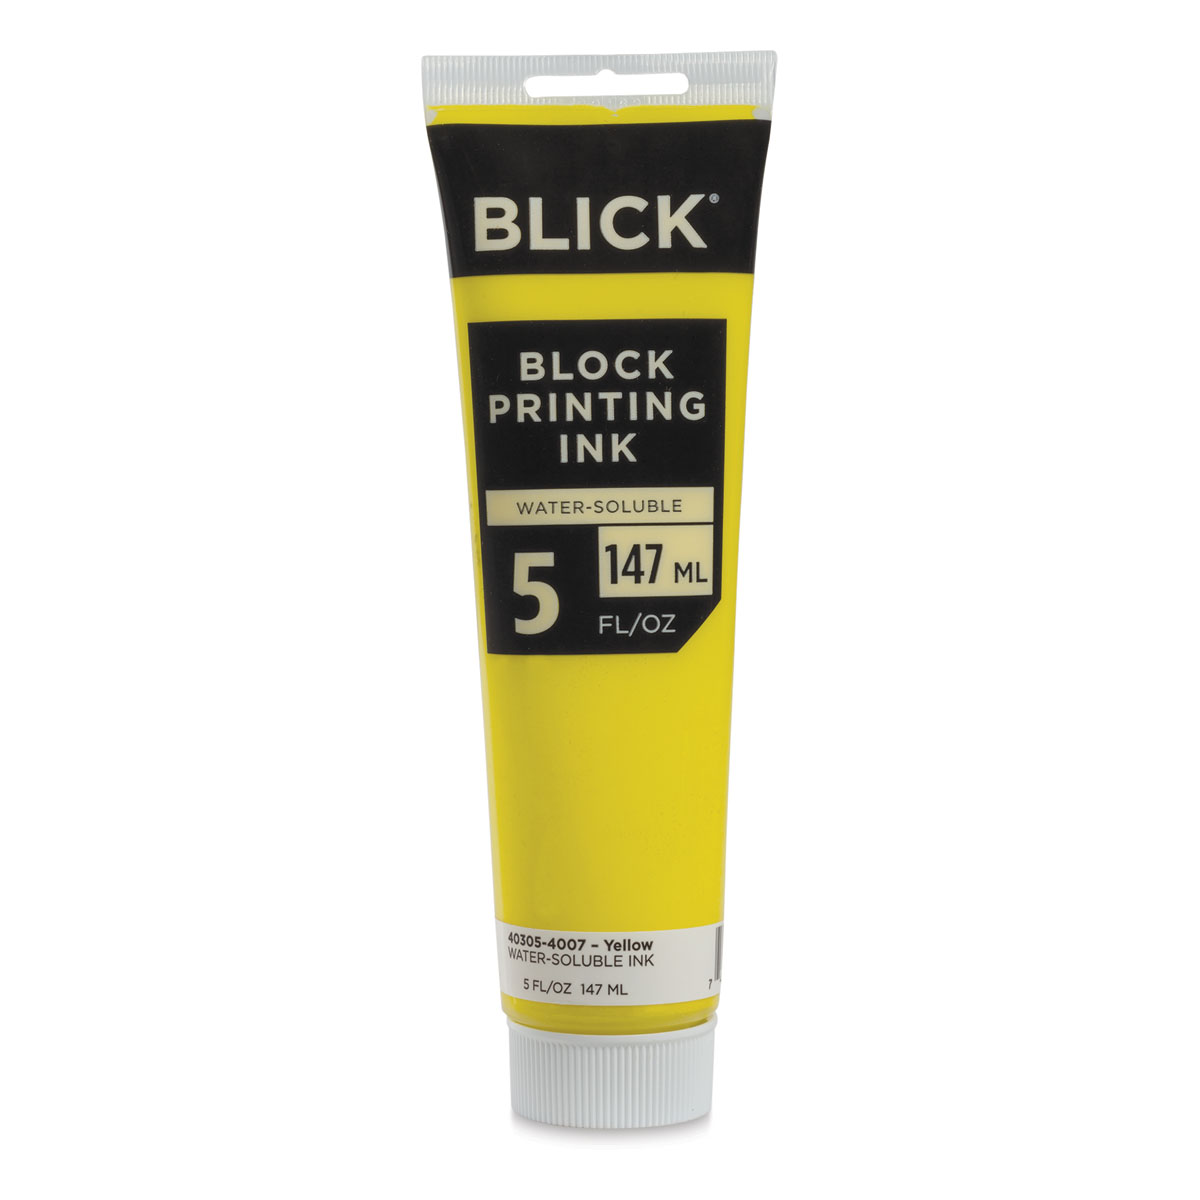 Water-Soluble Block Printing Ink - Yellow